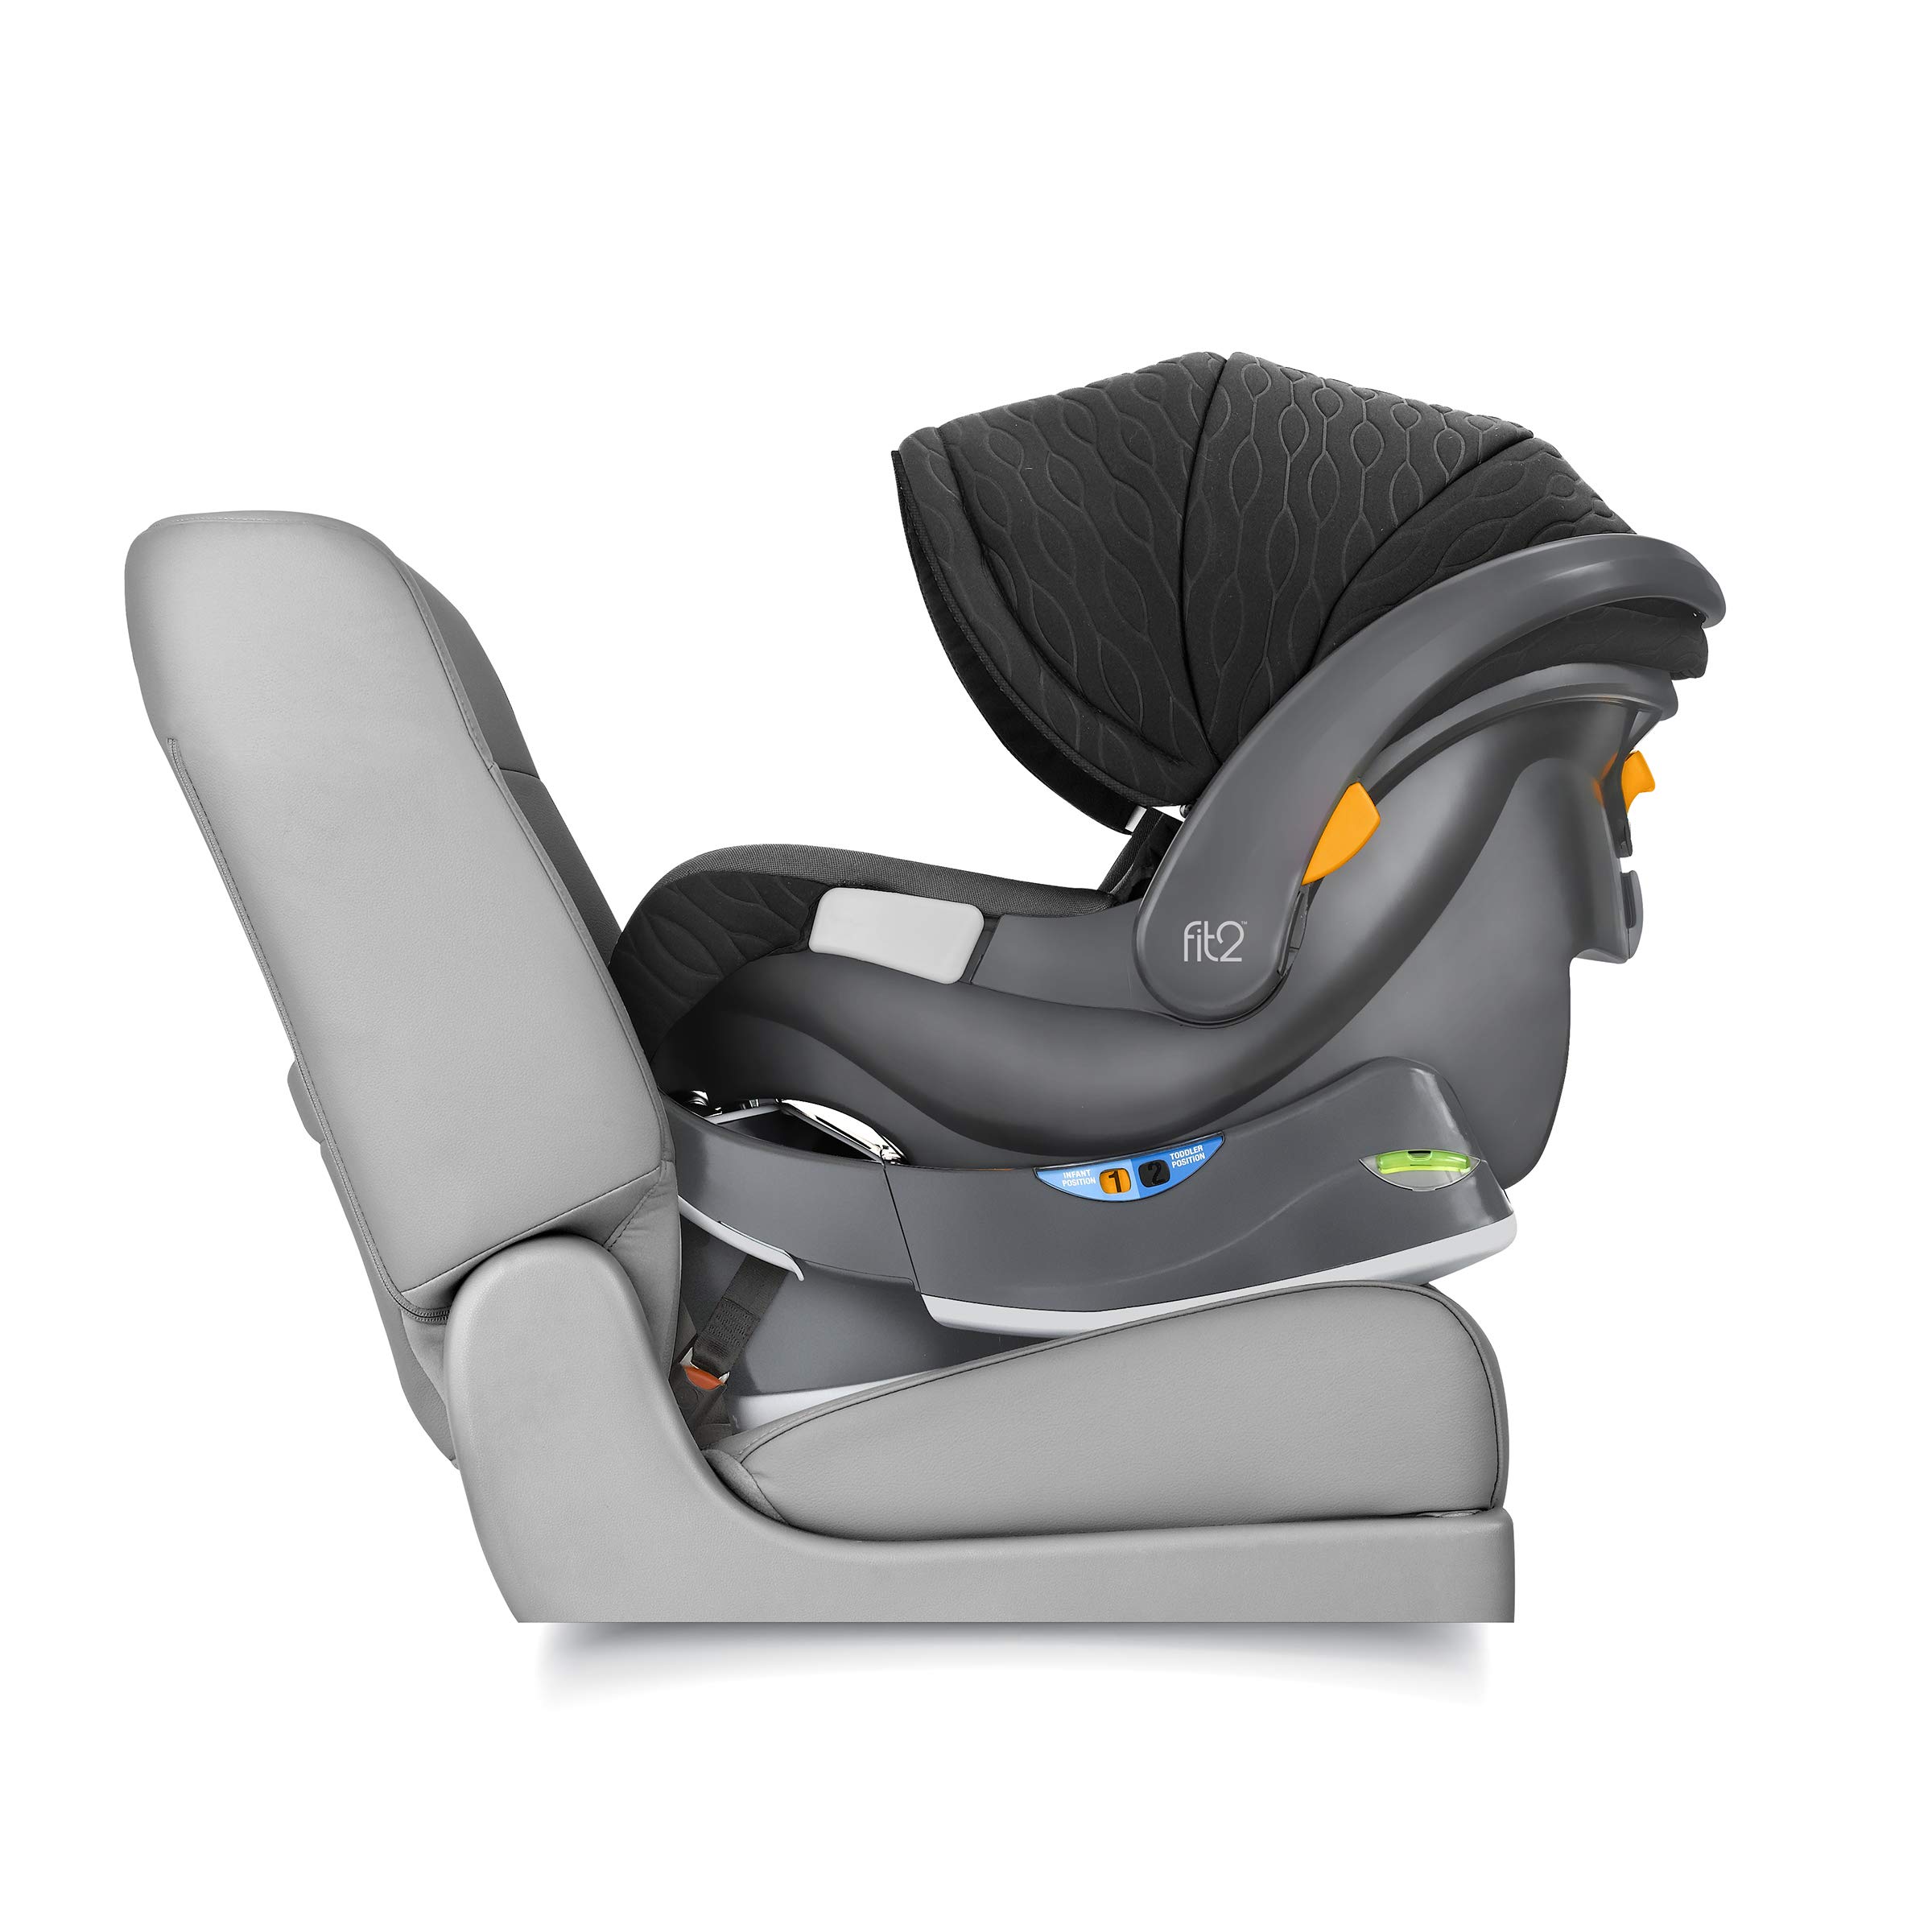 Chicco Fit2 Infant & Toddler Car Seat - Cienna